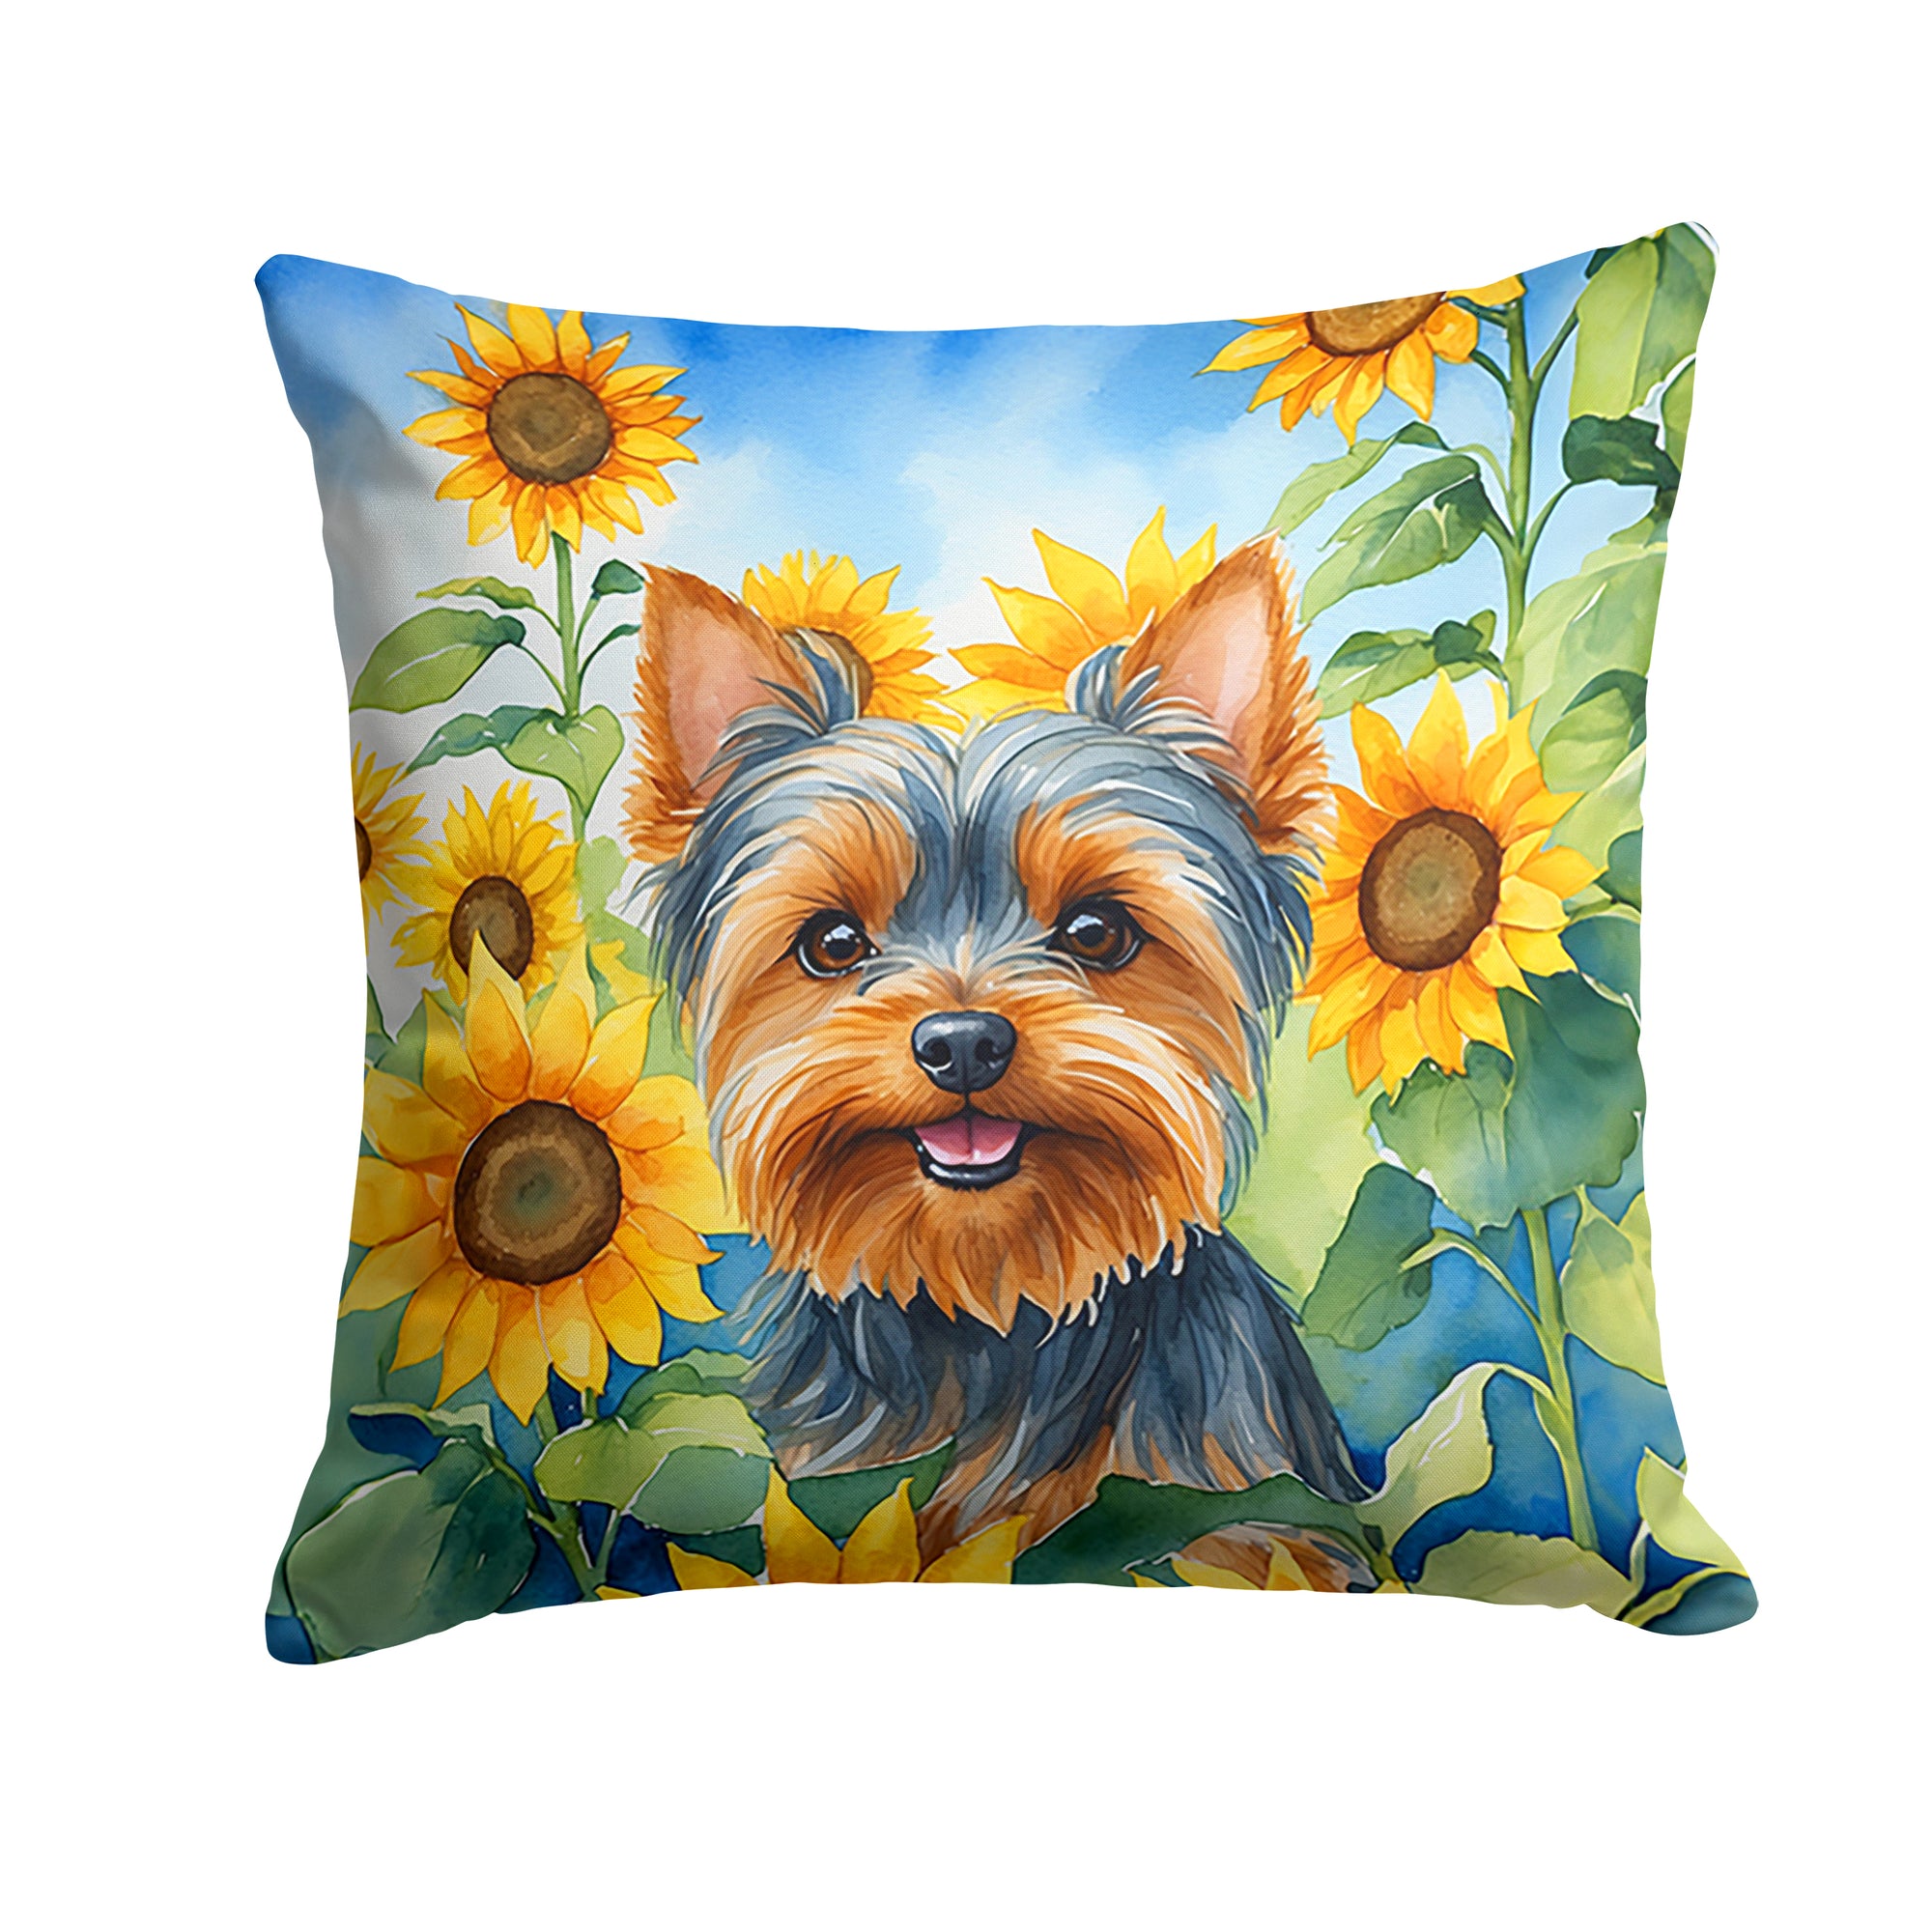 Buy this Yorkshire Terrier in Sunflowers Throw Pillow